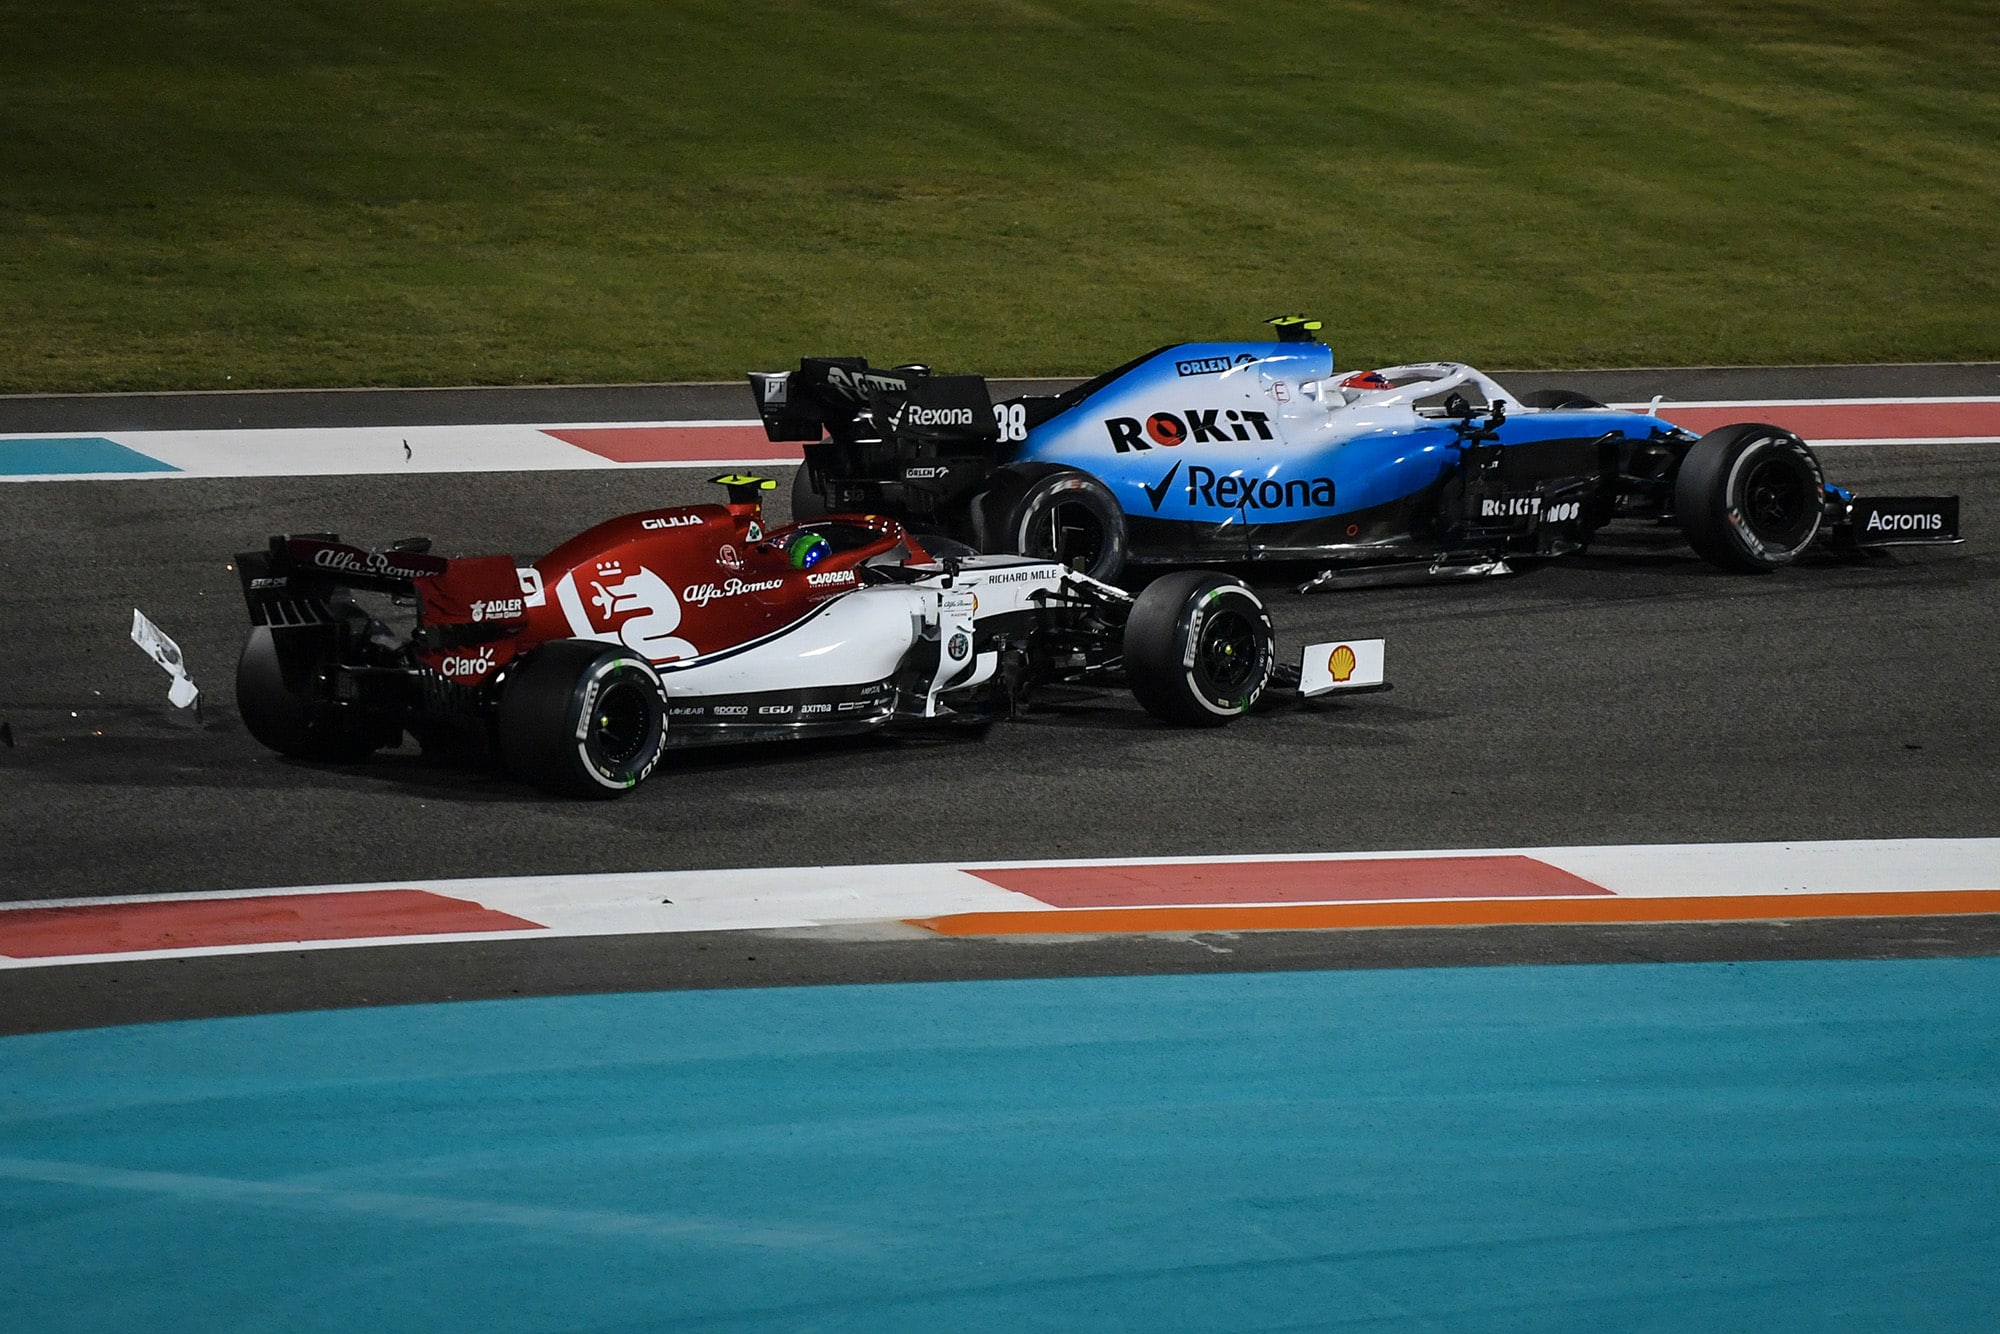 Debris falls onto the track after Antonio Giovinazzi and Robert Kubica collide at the 2019 Abu Dhabi Grand Prix